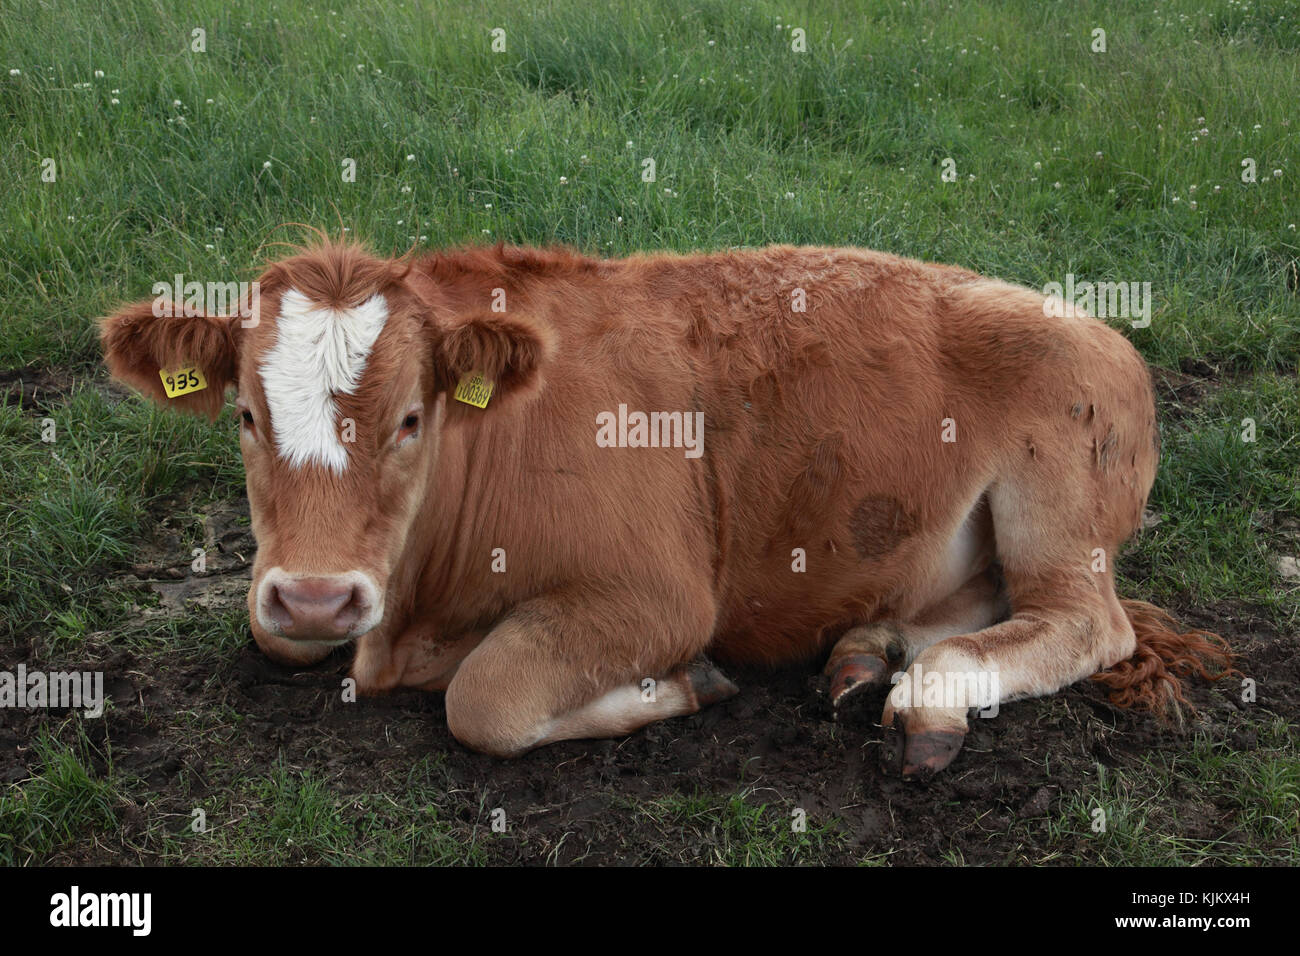 A calf with primary and secondary ear tags Stock Photo